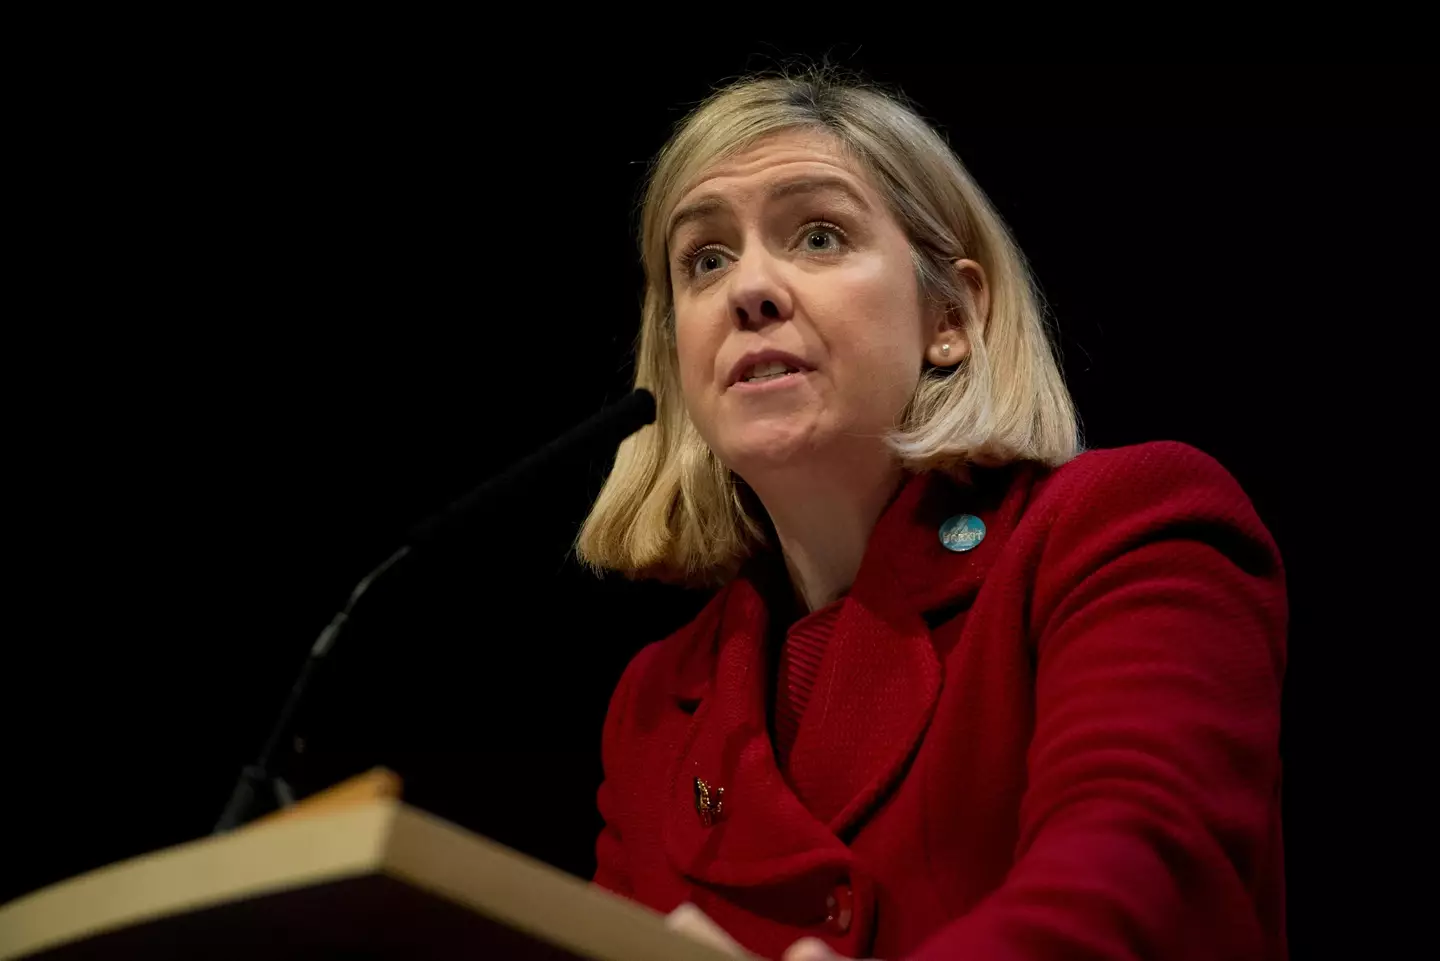 Andrea Jenkyns has since been appointed to the Department of Education.